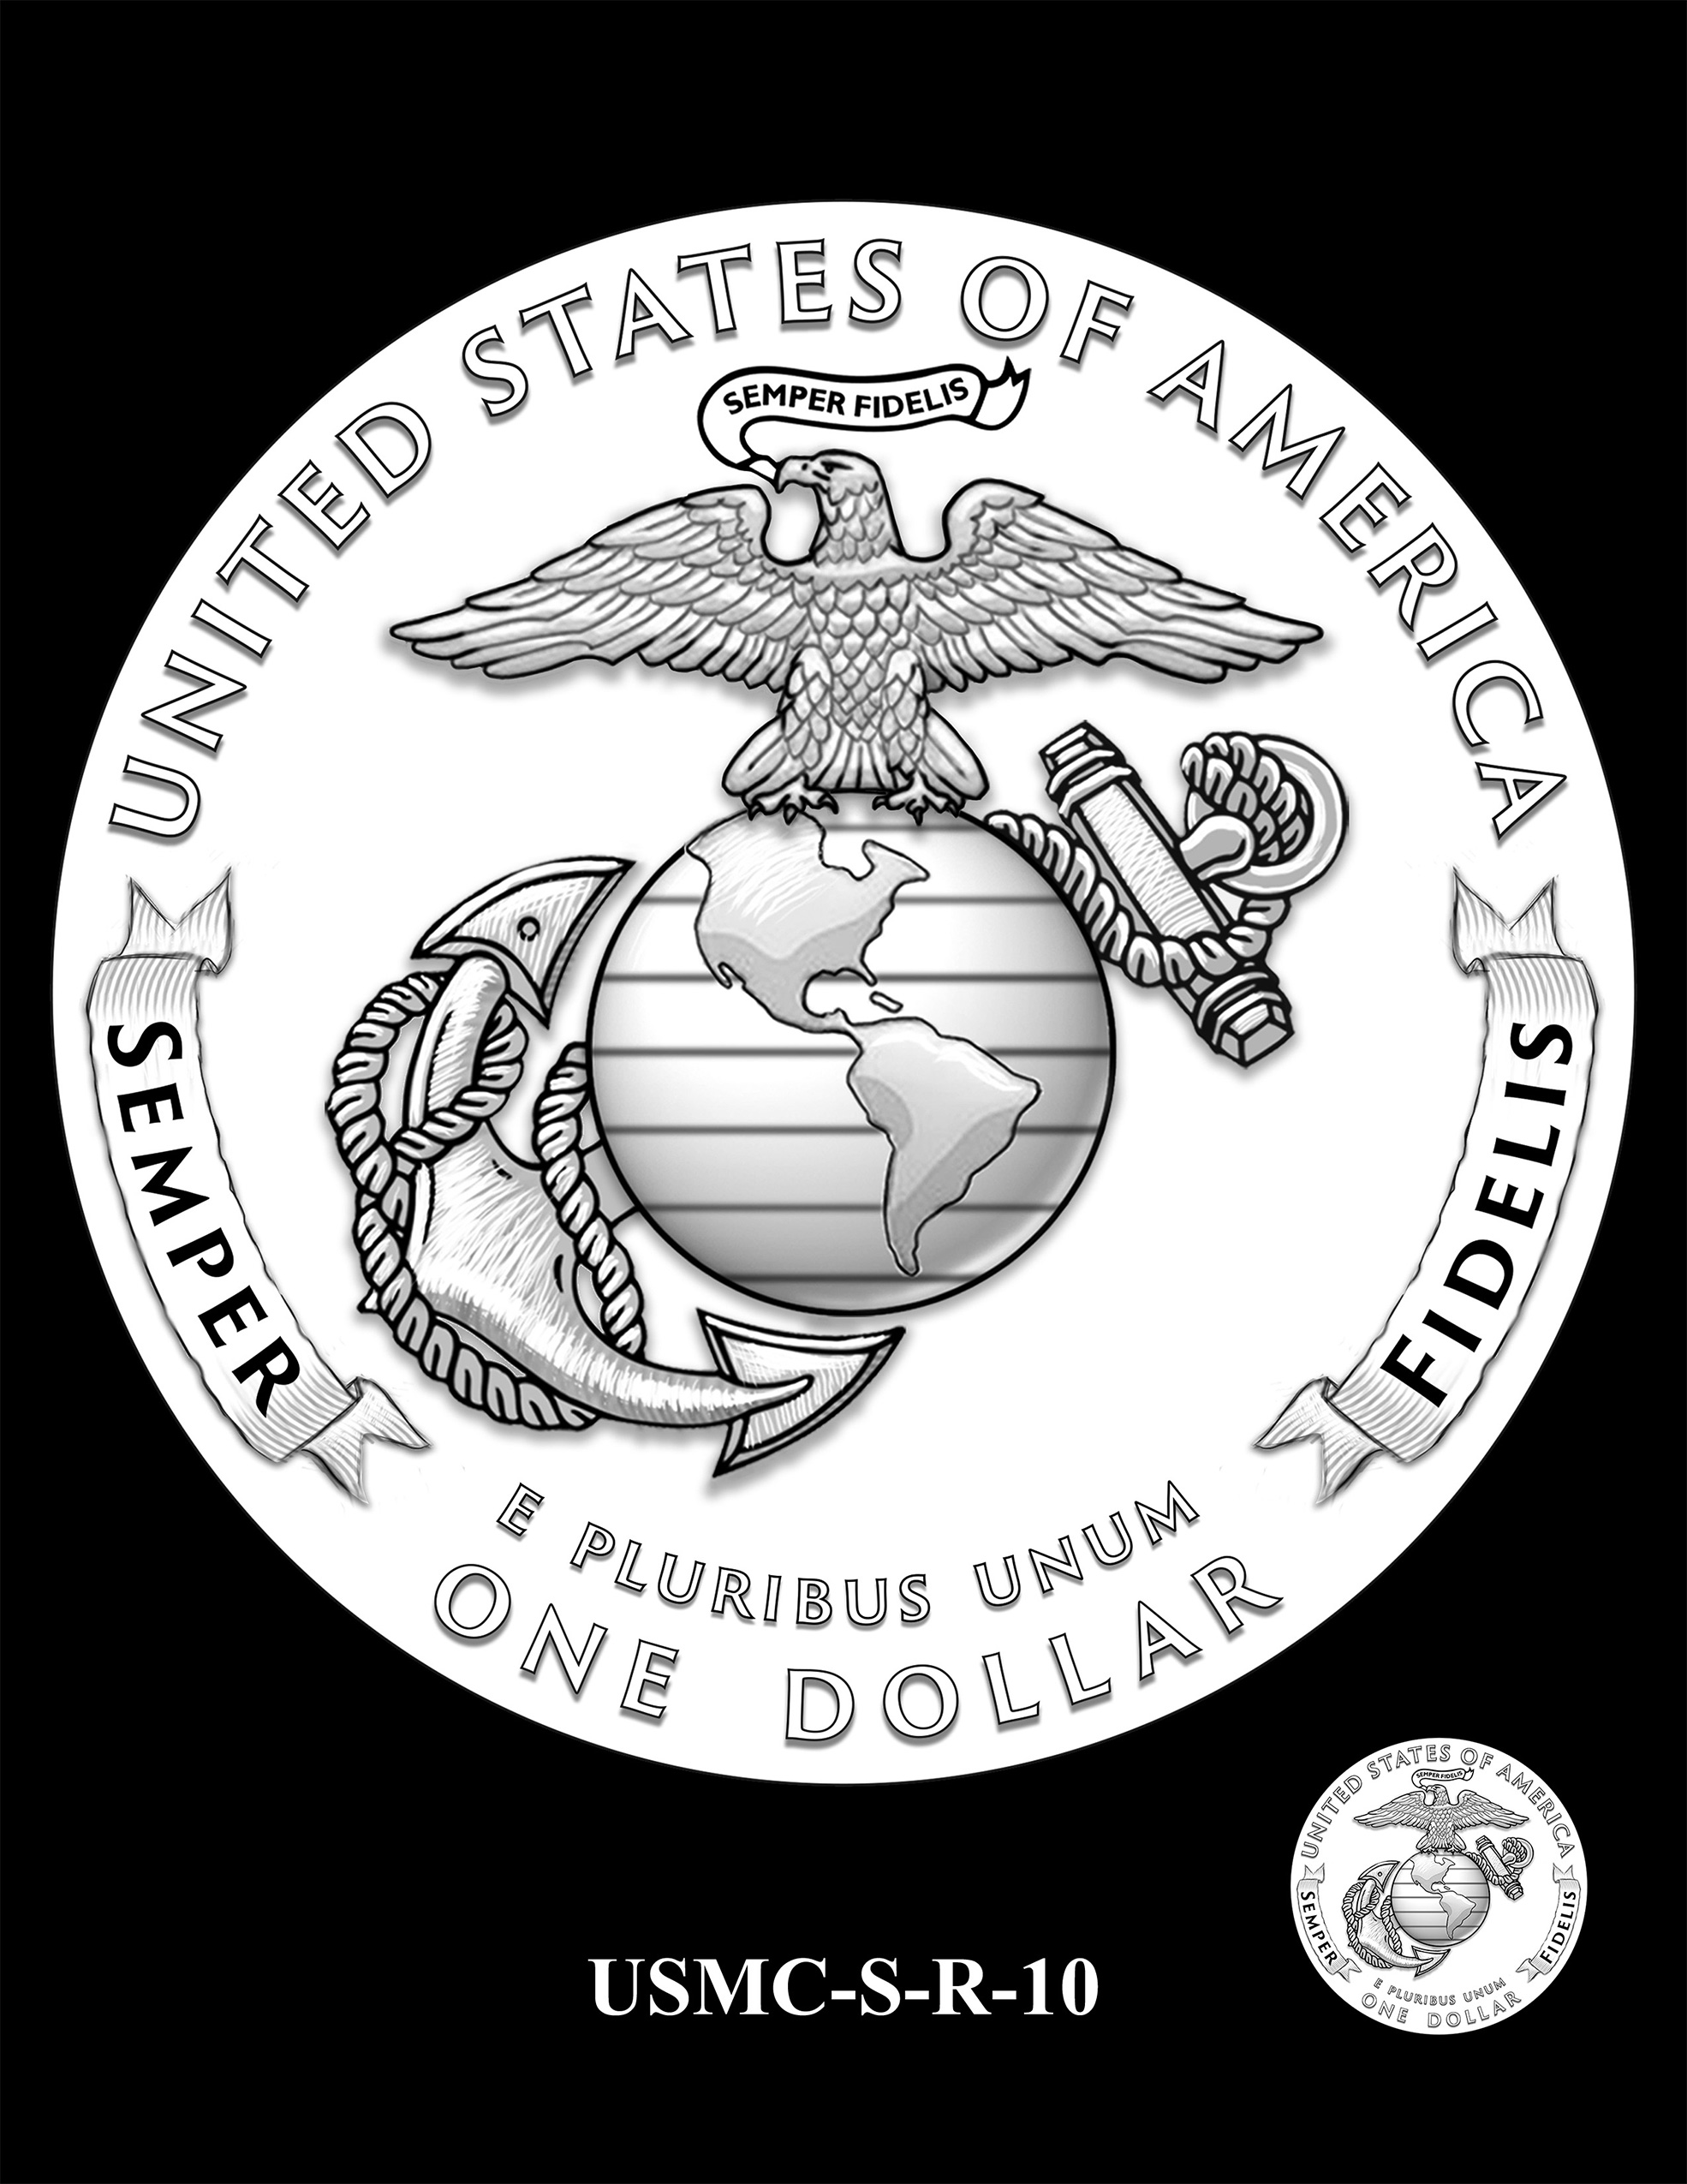 USMC-S-R-10 -- 250th Anniversary of the United States Marine Corps - Silver